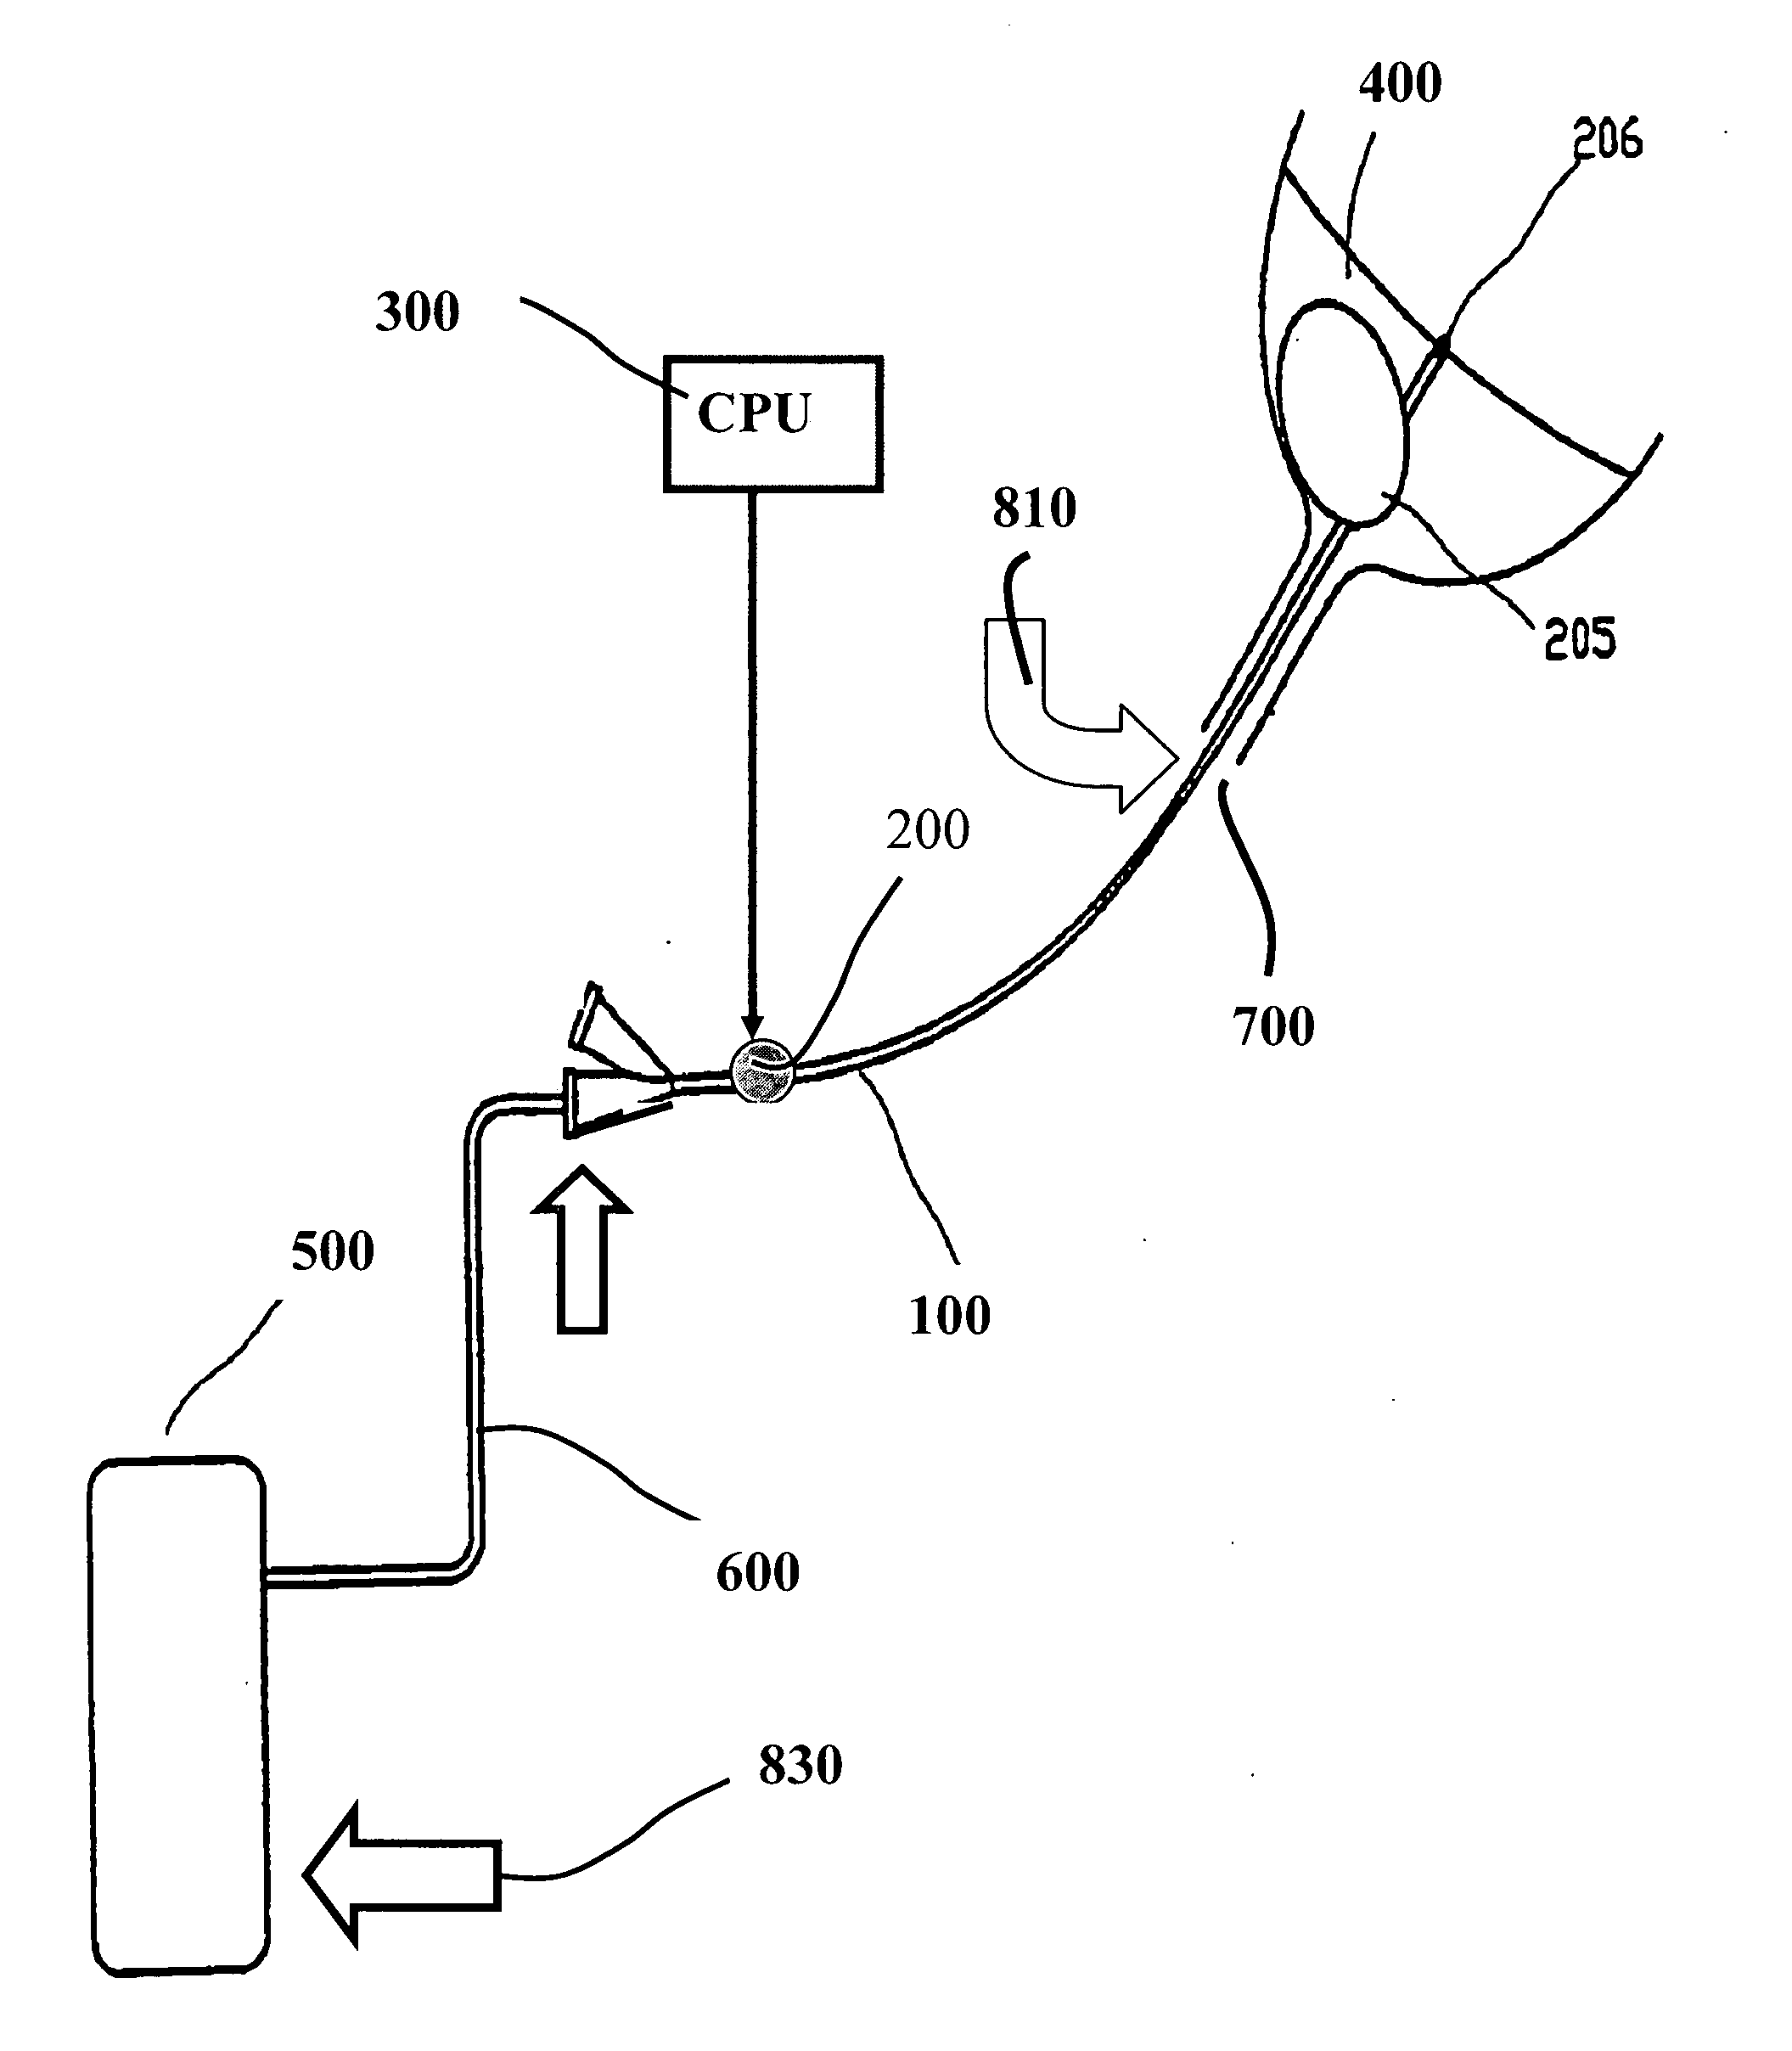 Acoustic add-on device for biofilm prevention in urinary catheter